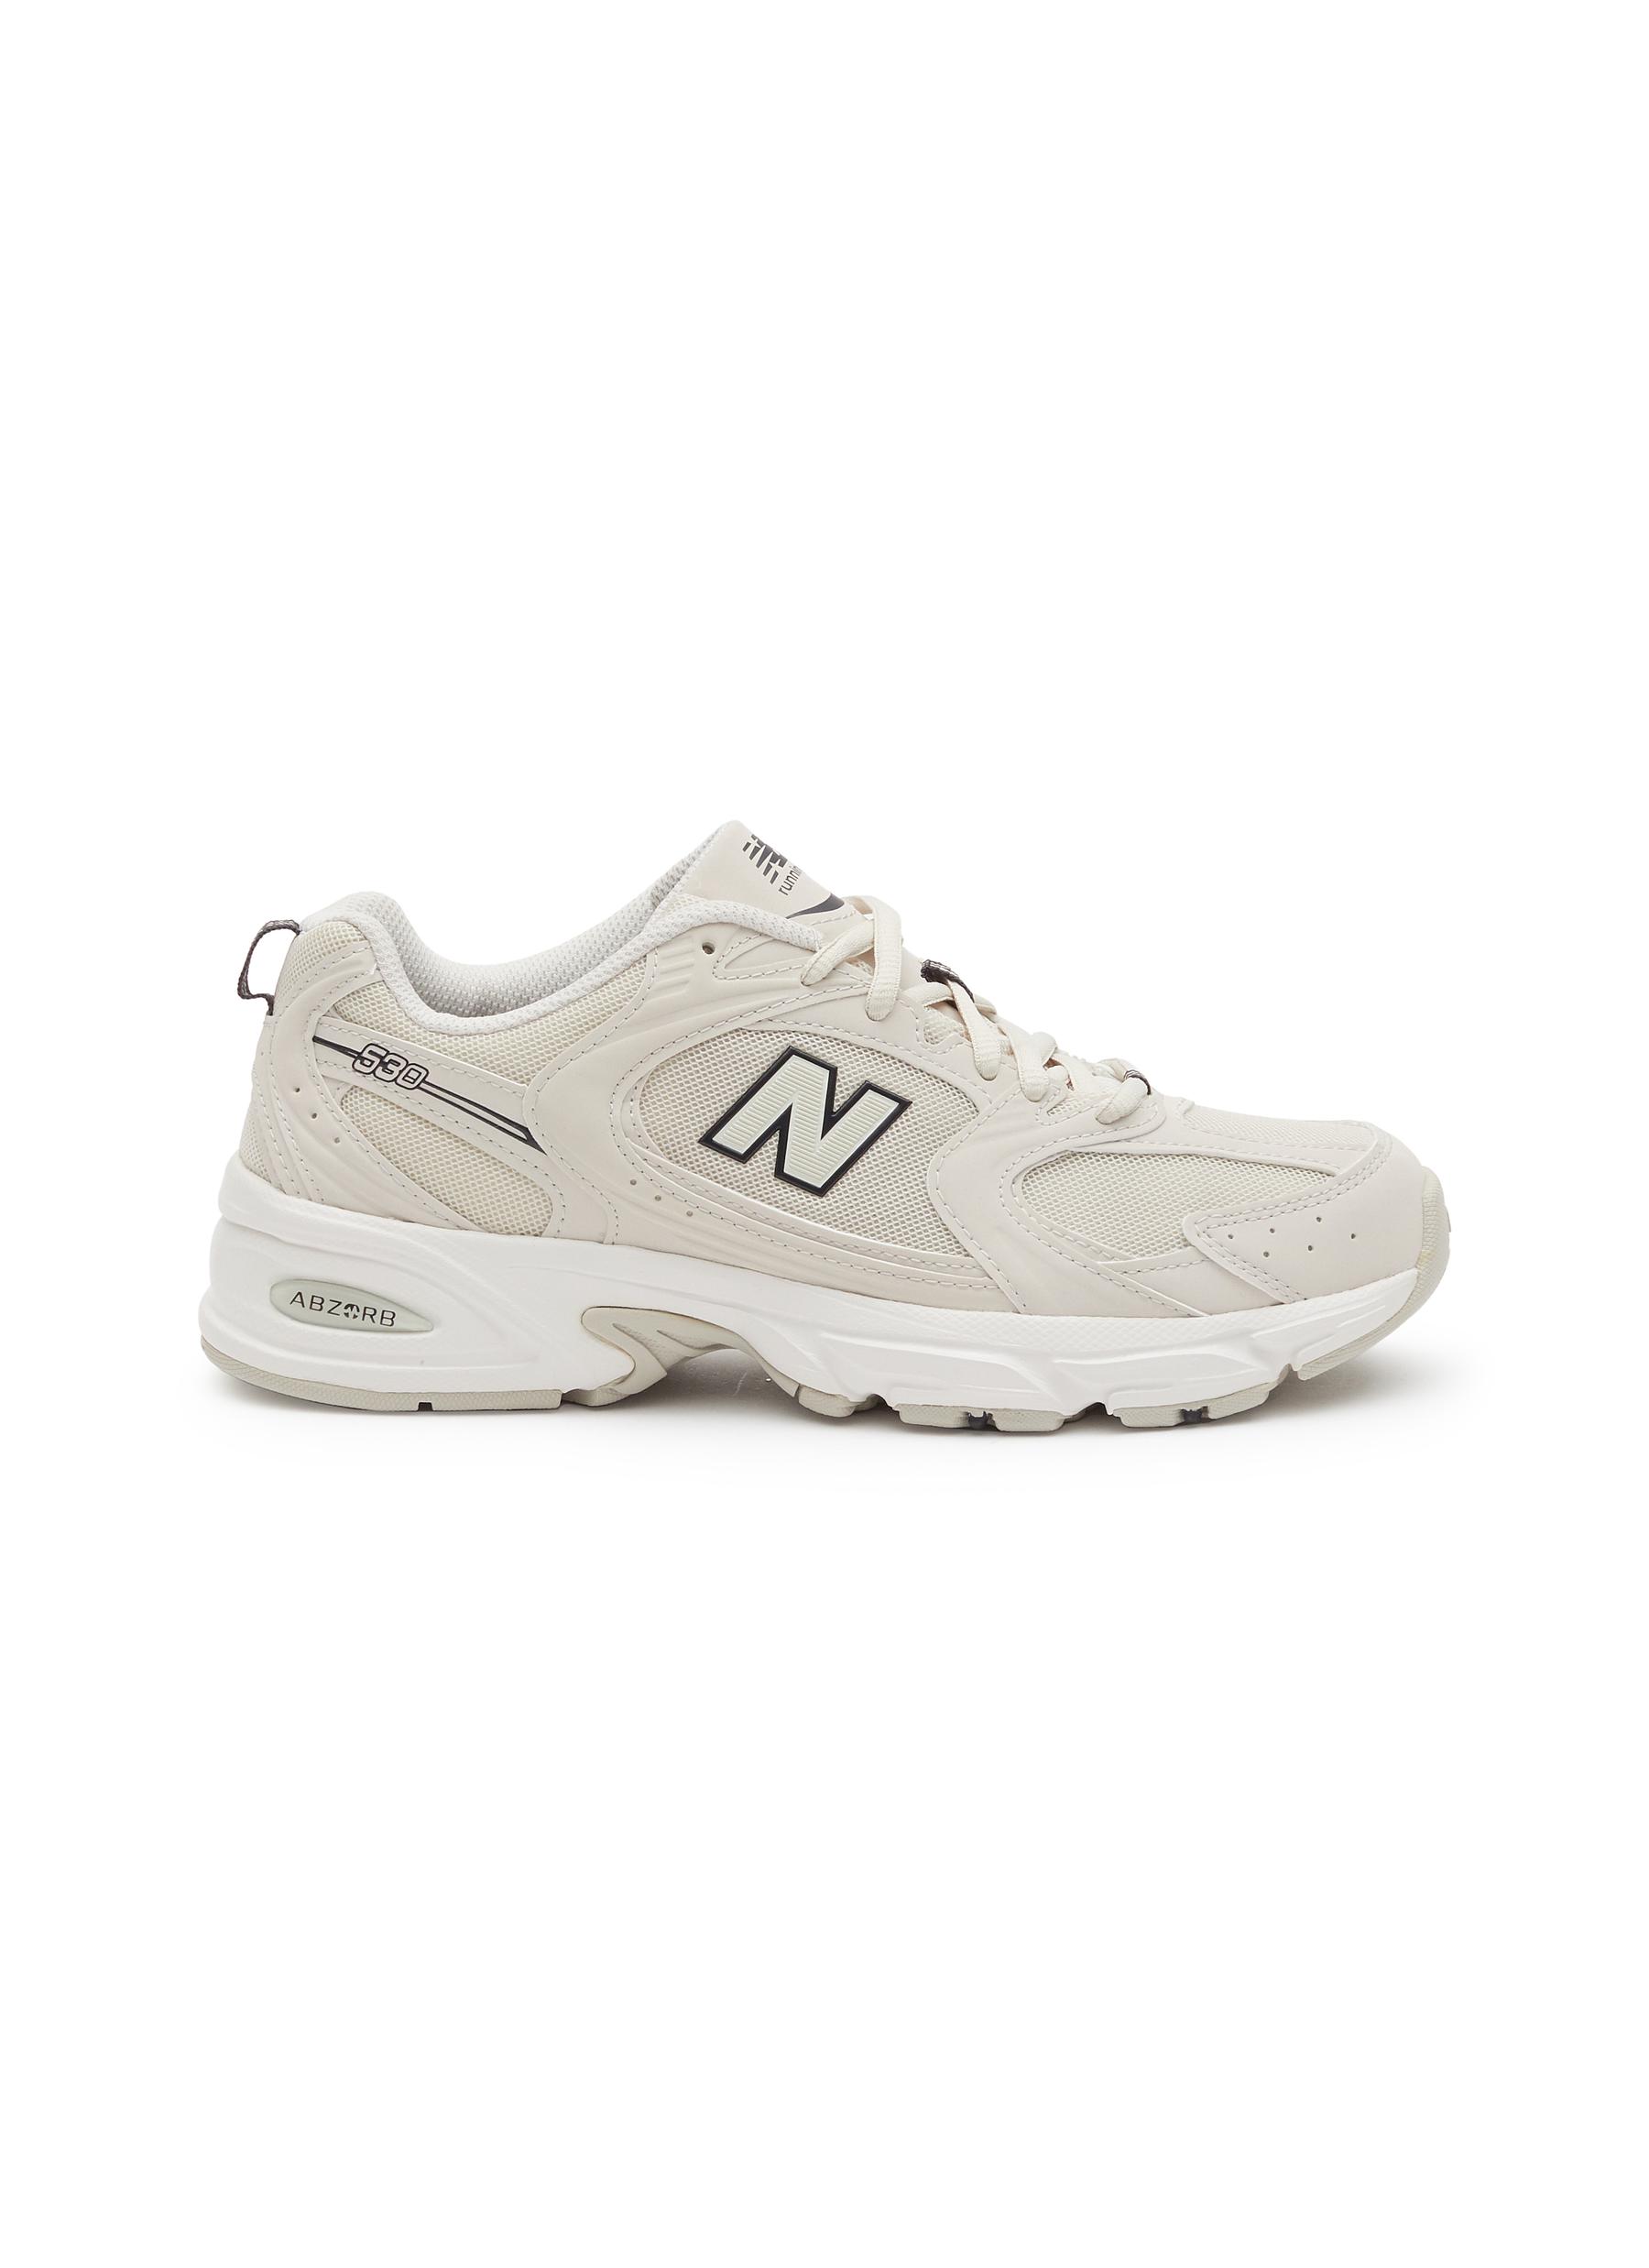 NEW BALANCE '530' LOW TOP LACE UP SNEAKERS